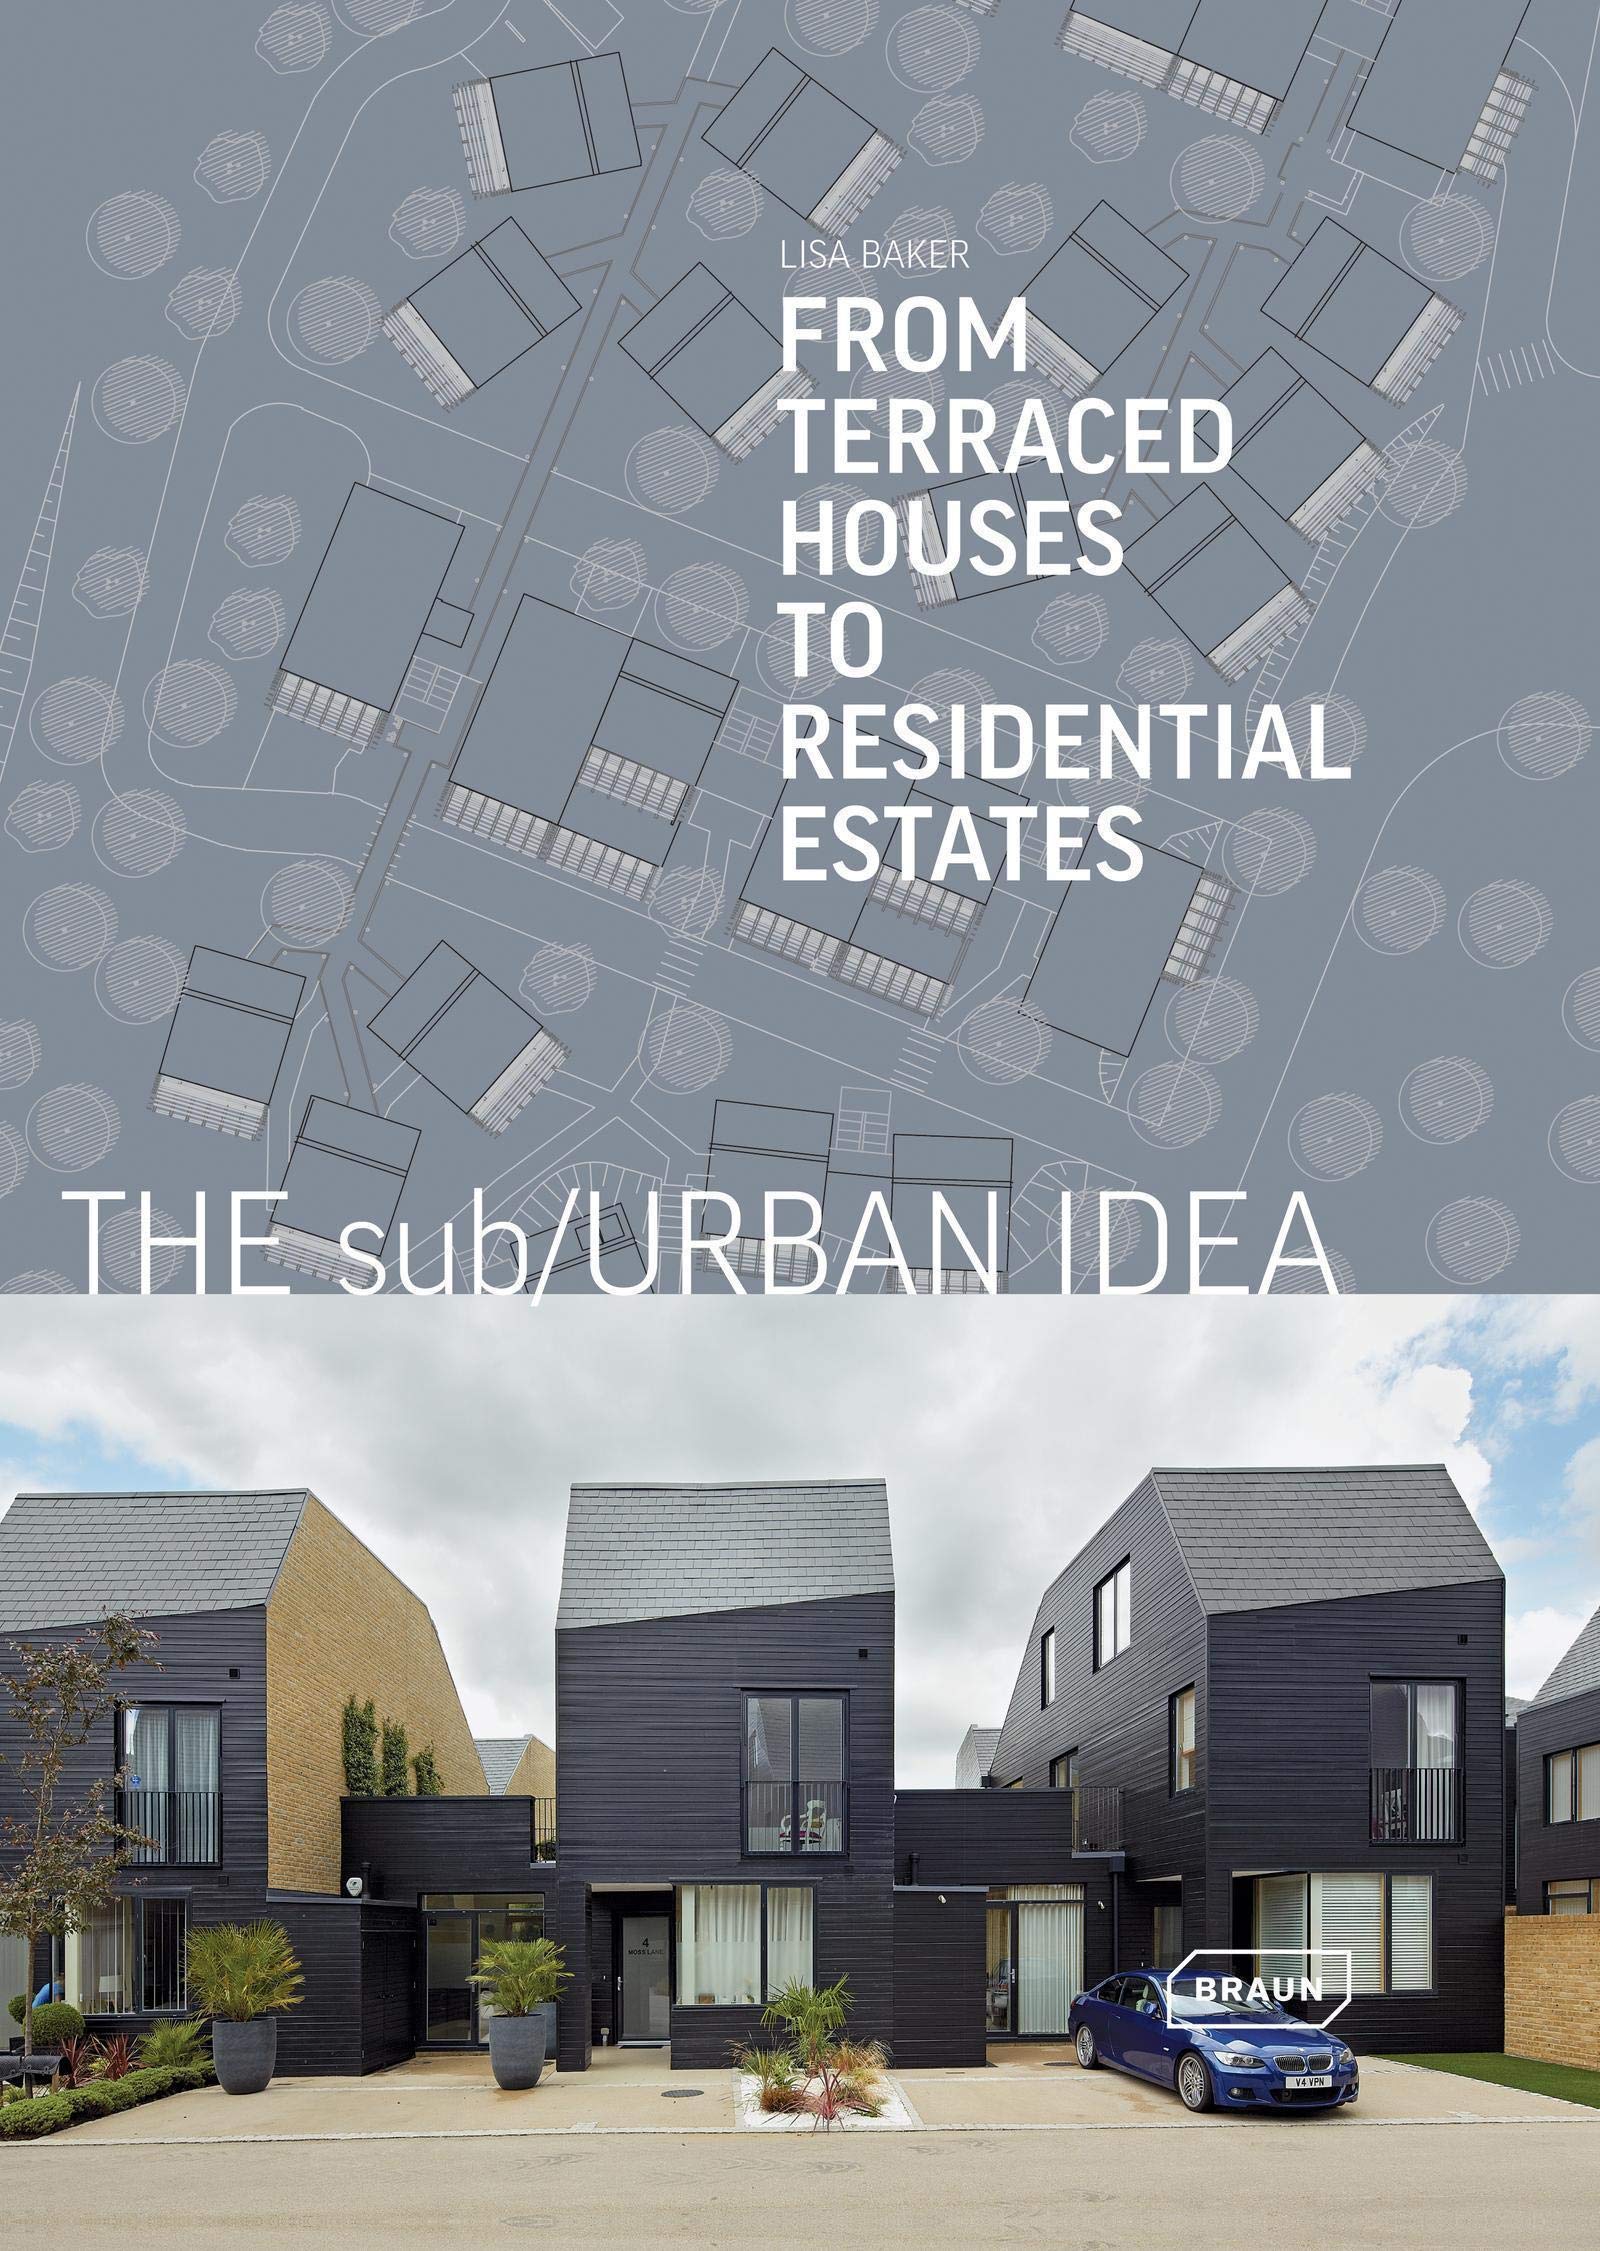 The sub / Urban Idea: From Terraced Houses to Residential Estates